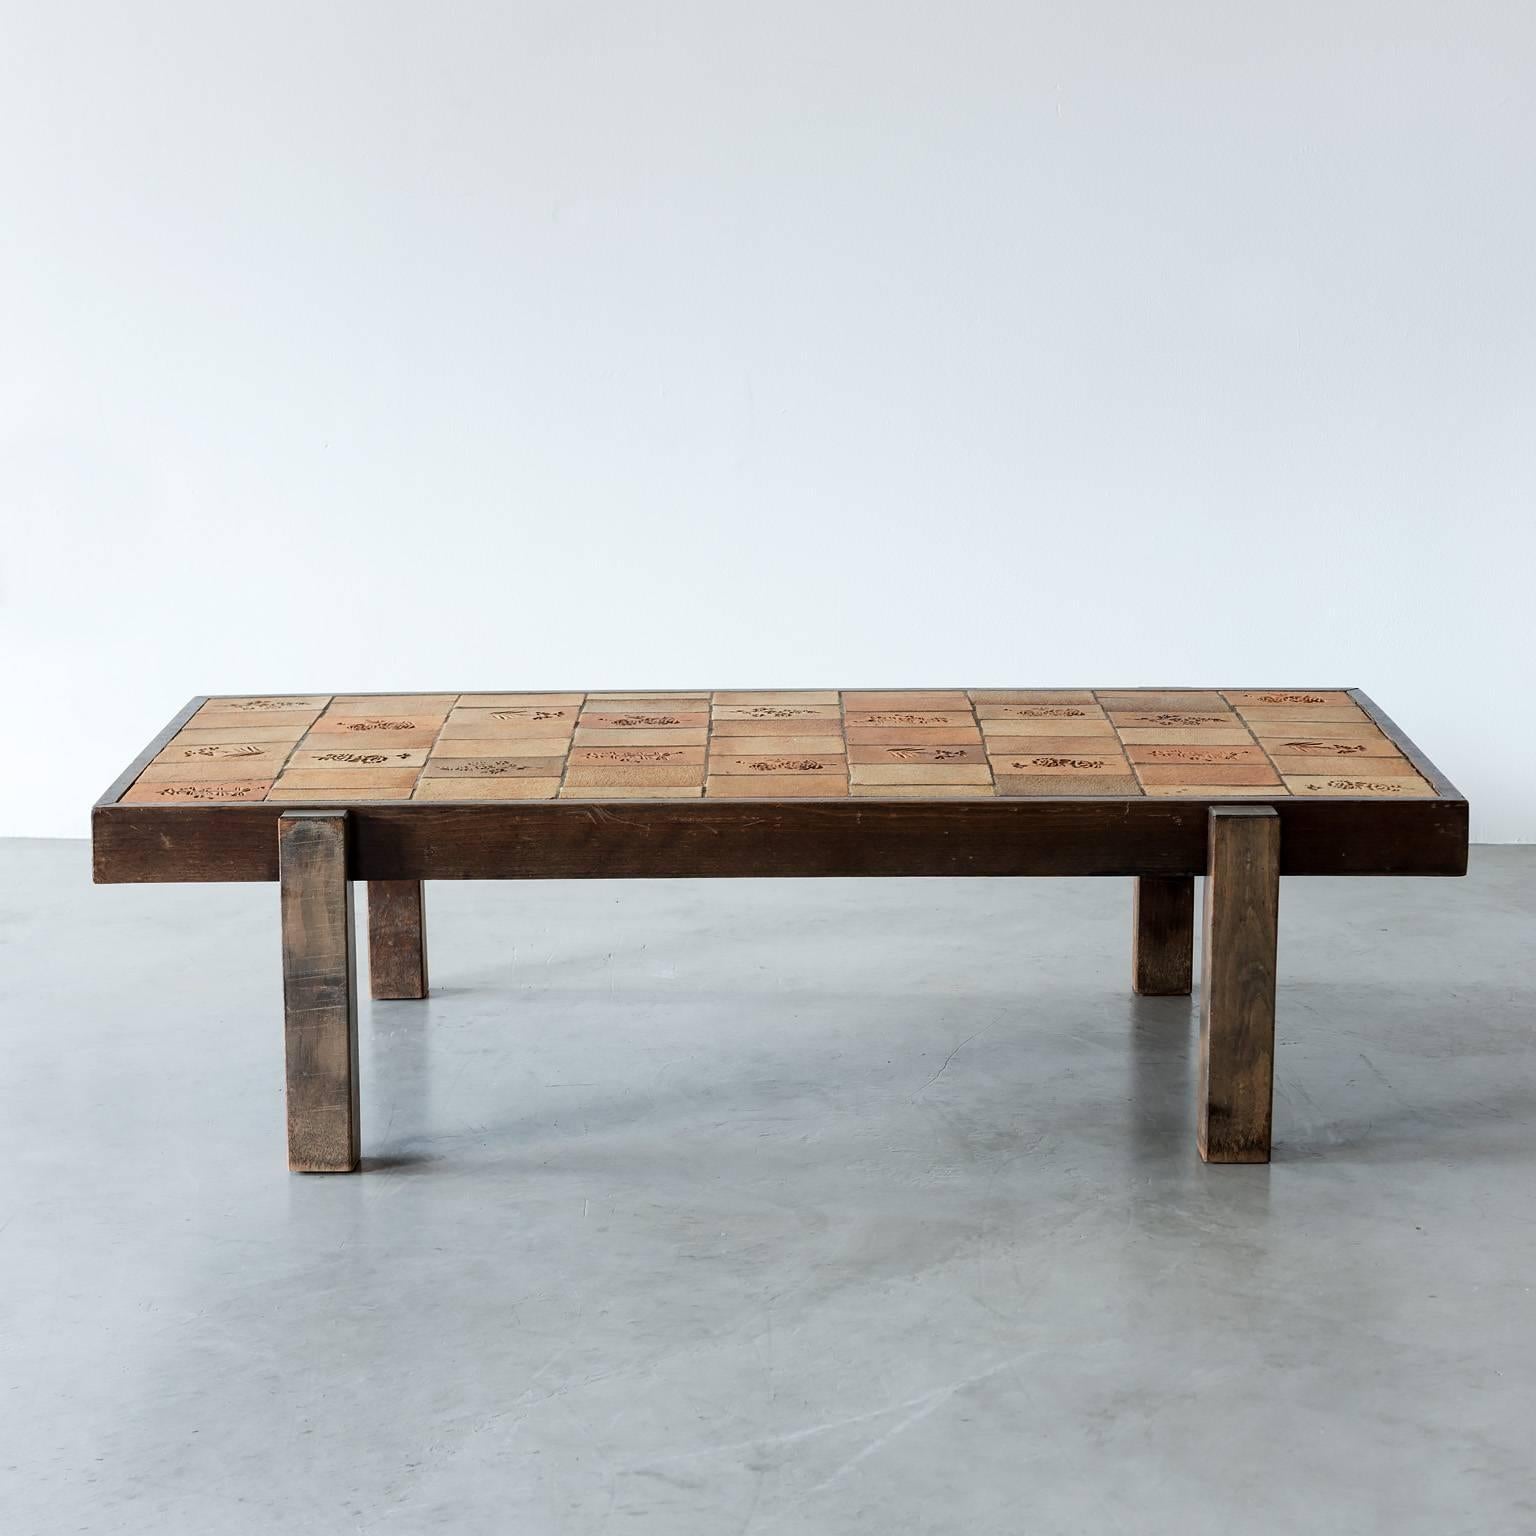 Coffee table in oak and ceramic tile by Roger Capron. Capron created these tiles by pressing garrigue, or the low-growing vegetation on the limestone hills of the Mediterranean coast, into the tiles before firing them. From Vallauris, France, 1970s.